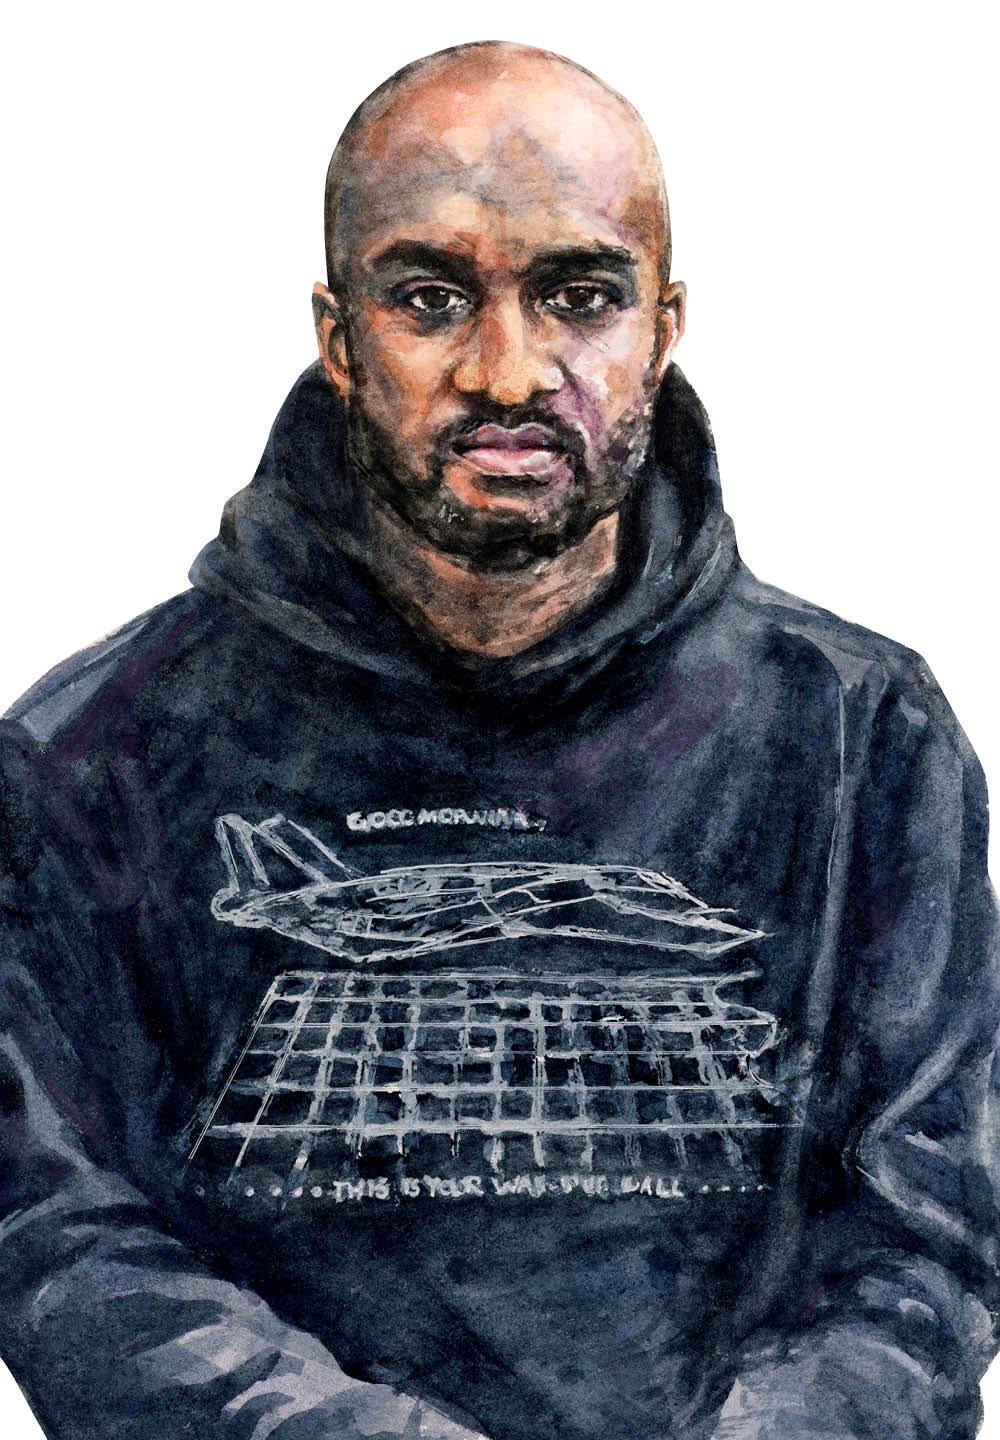 Sketch)Notes from Virgil Abloh's 